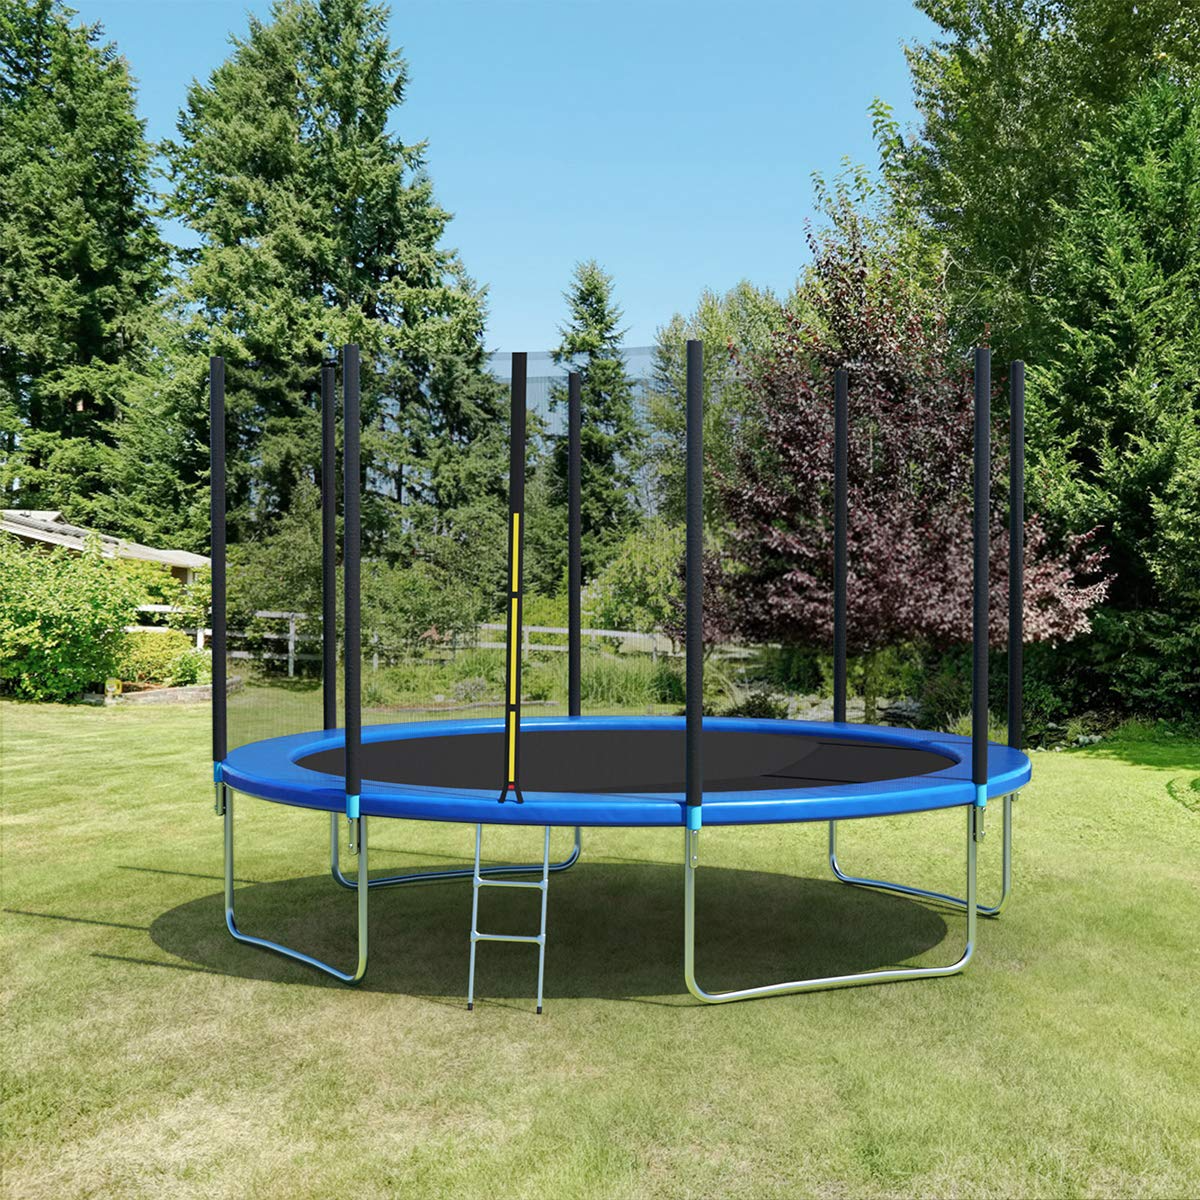 ASTM Approved 8 10 12 14 15 16Ft Trampoline for Adults Kids